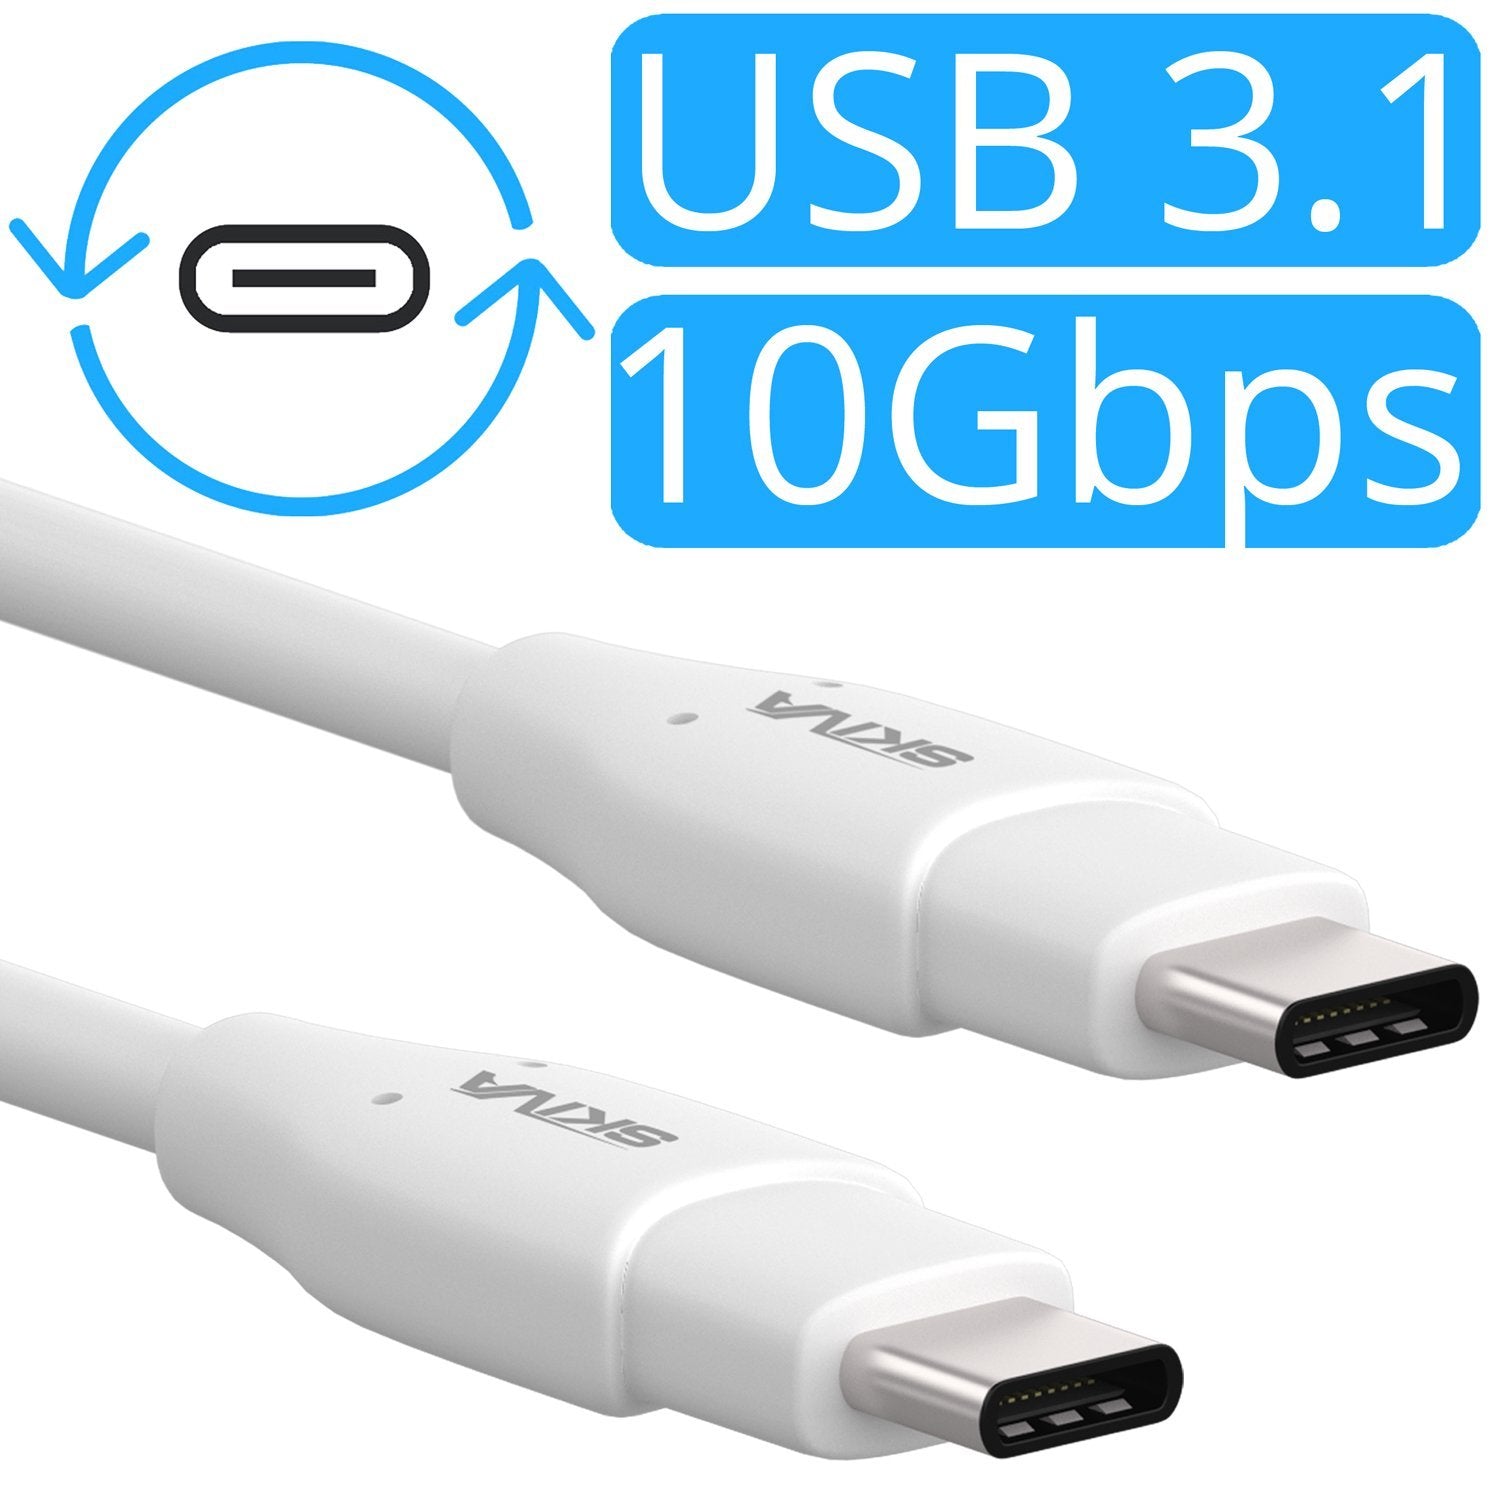 Skiva to USB-C 3.1 Gen 2 (3.2ft / 10 Gbps 3 Amps) with P